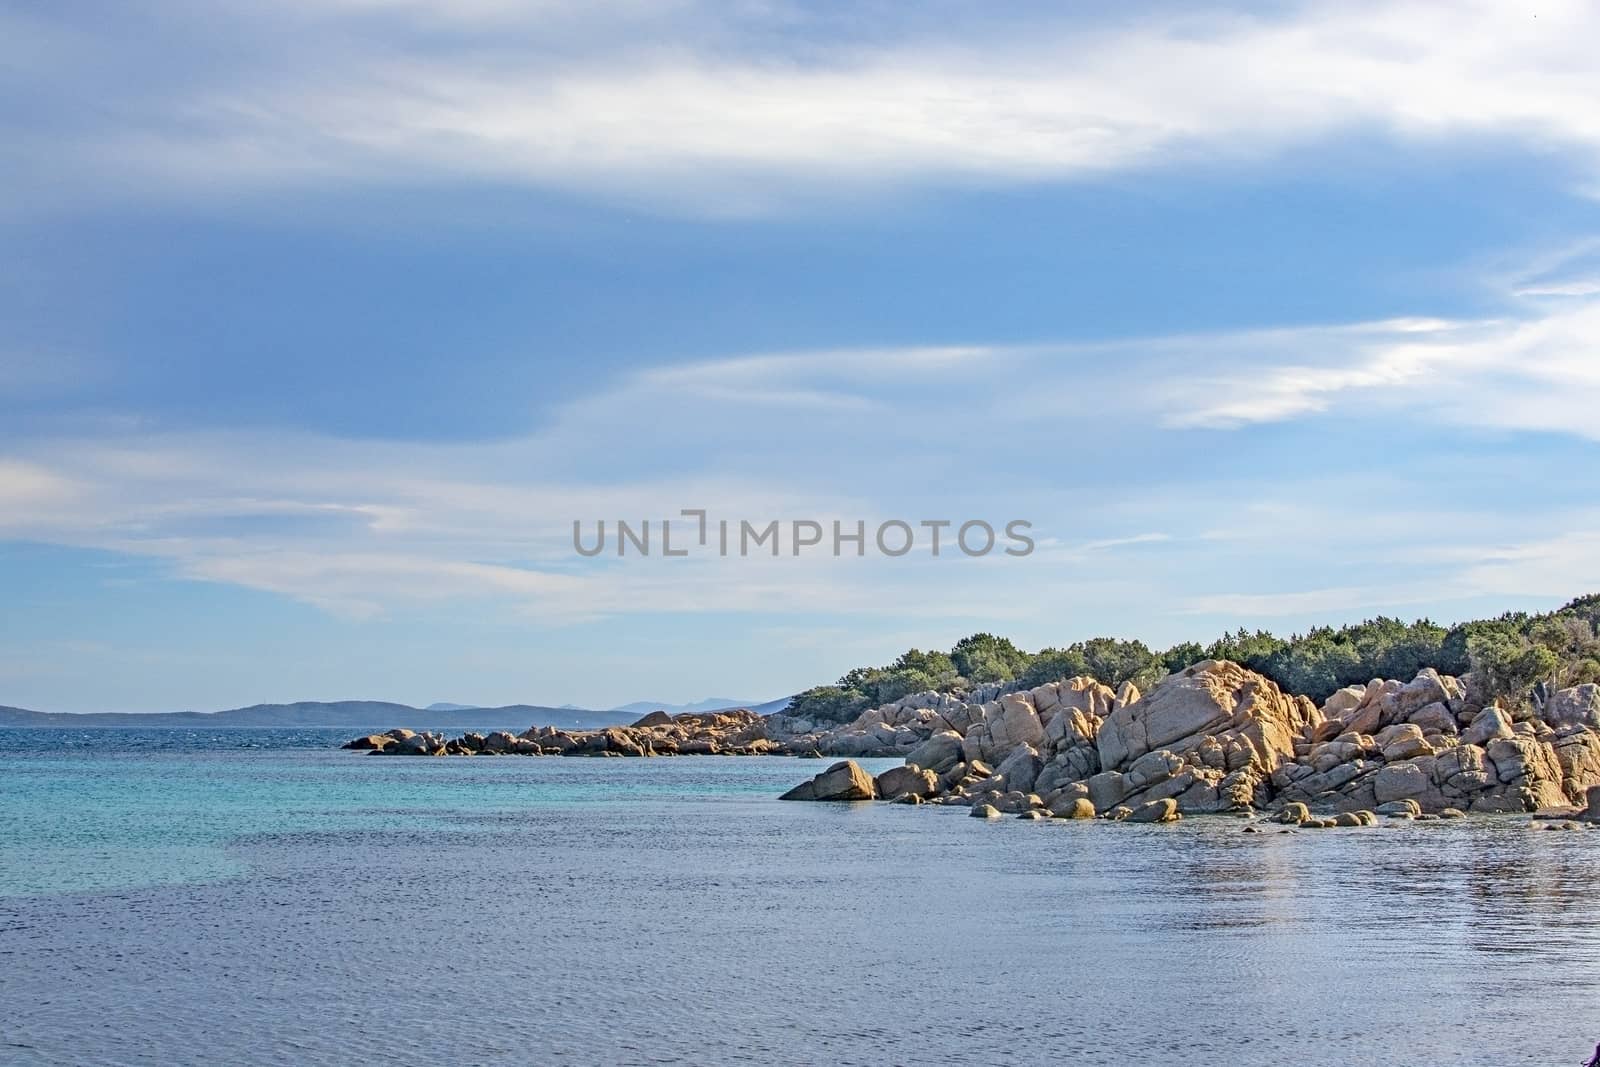 Seascape from a winter beach and blue and green sea in Costa Smeralda, Sardinia, Italy in March.